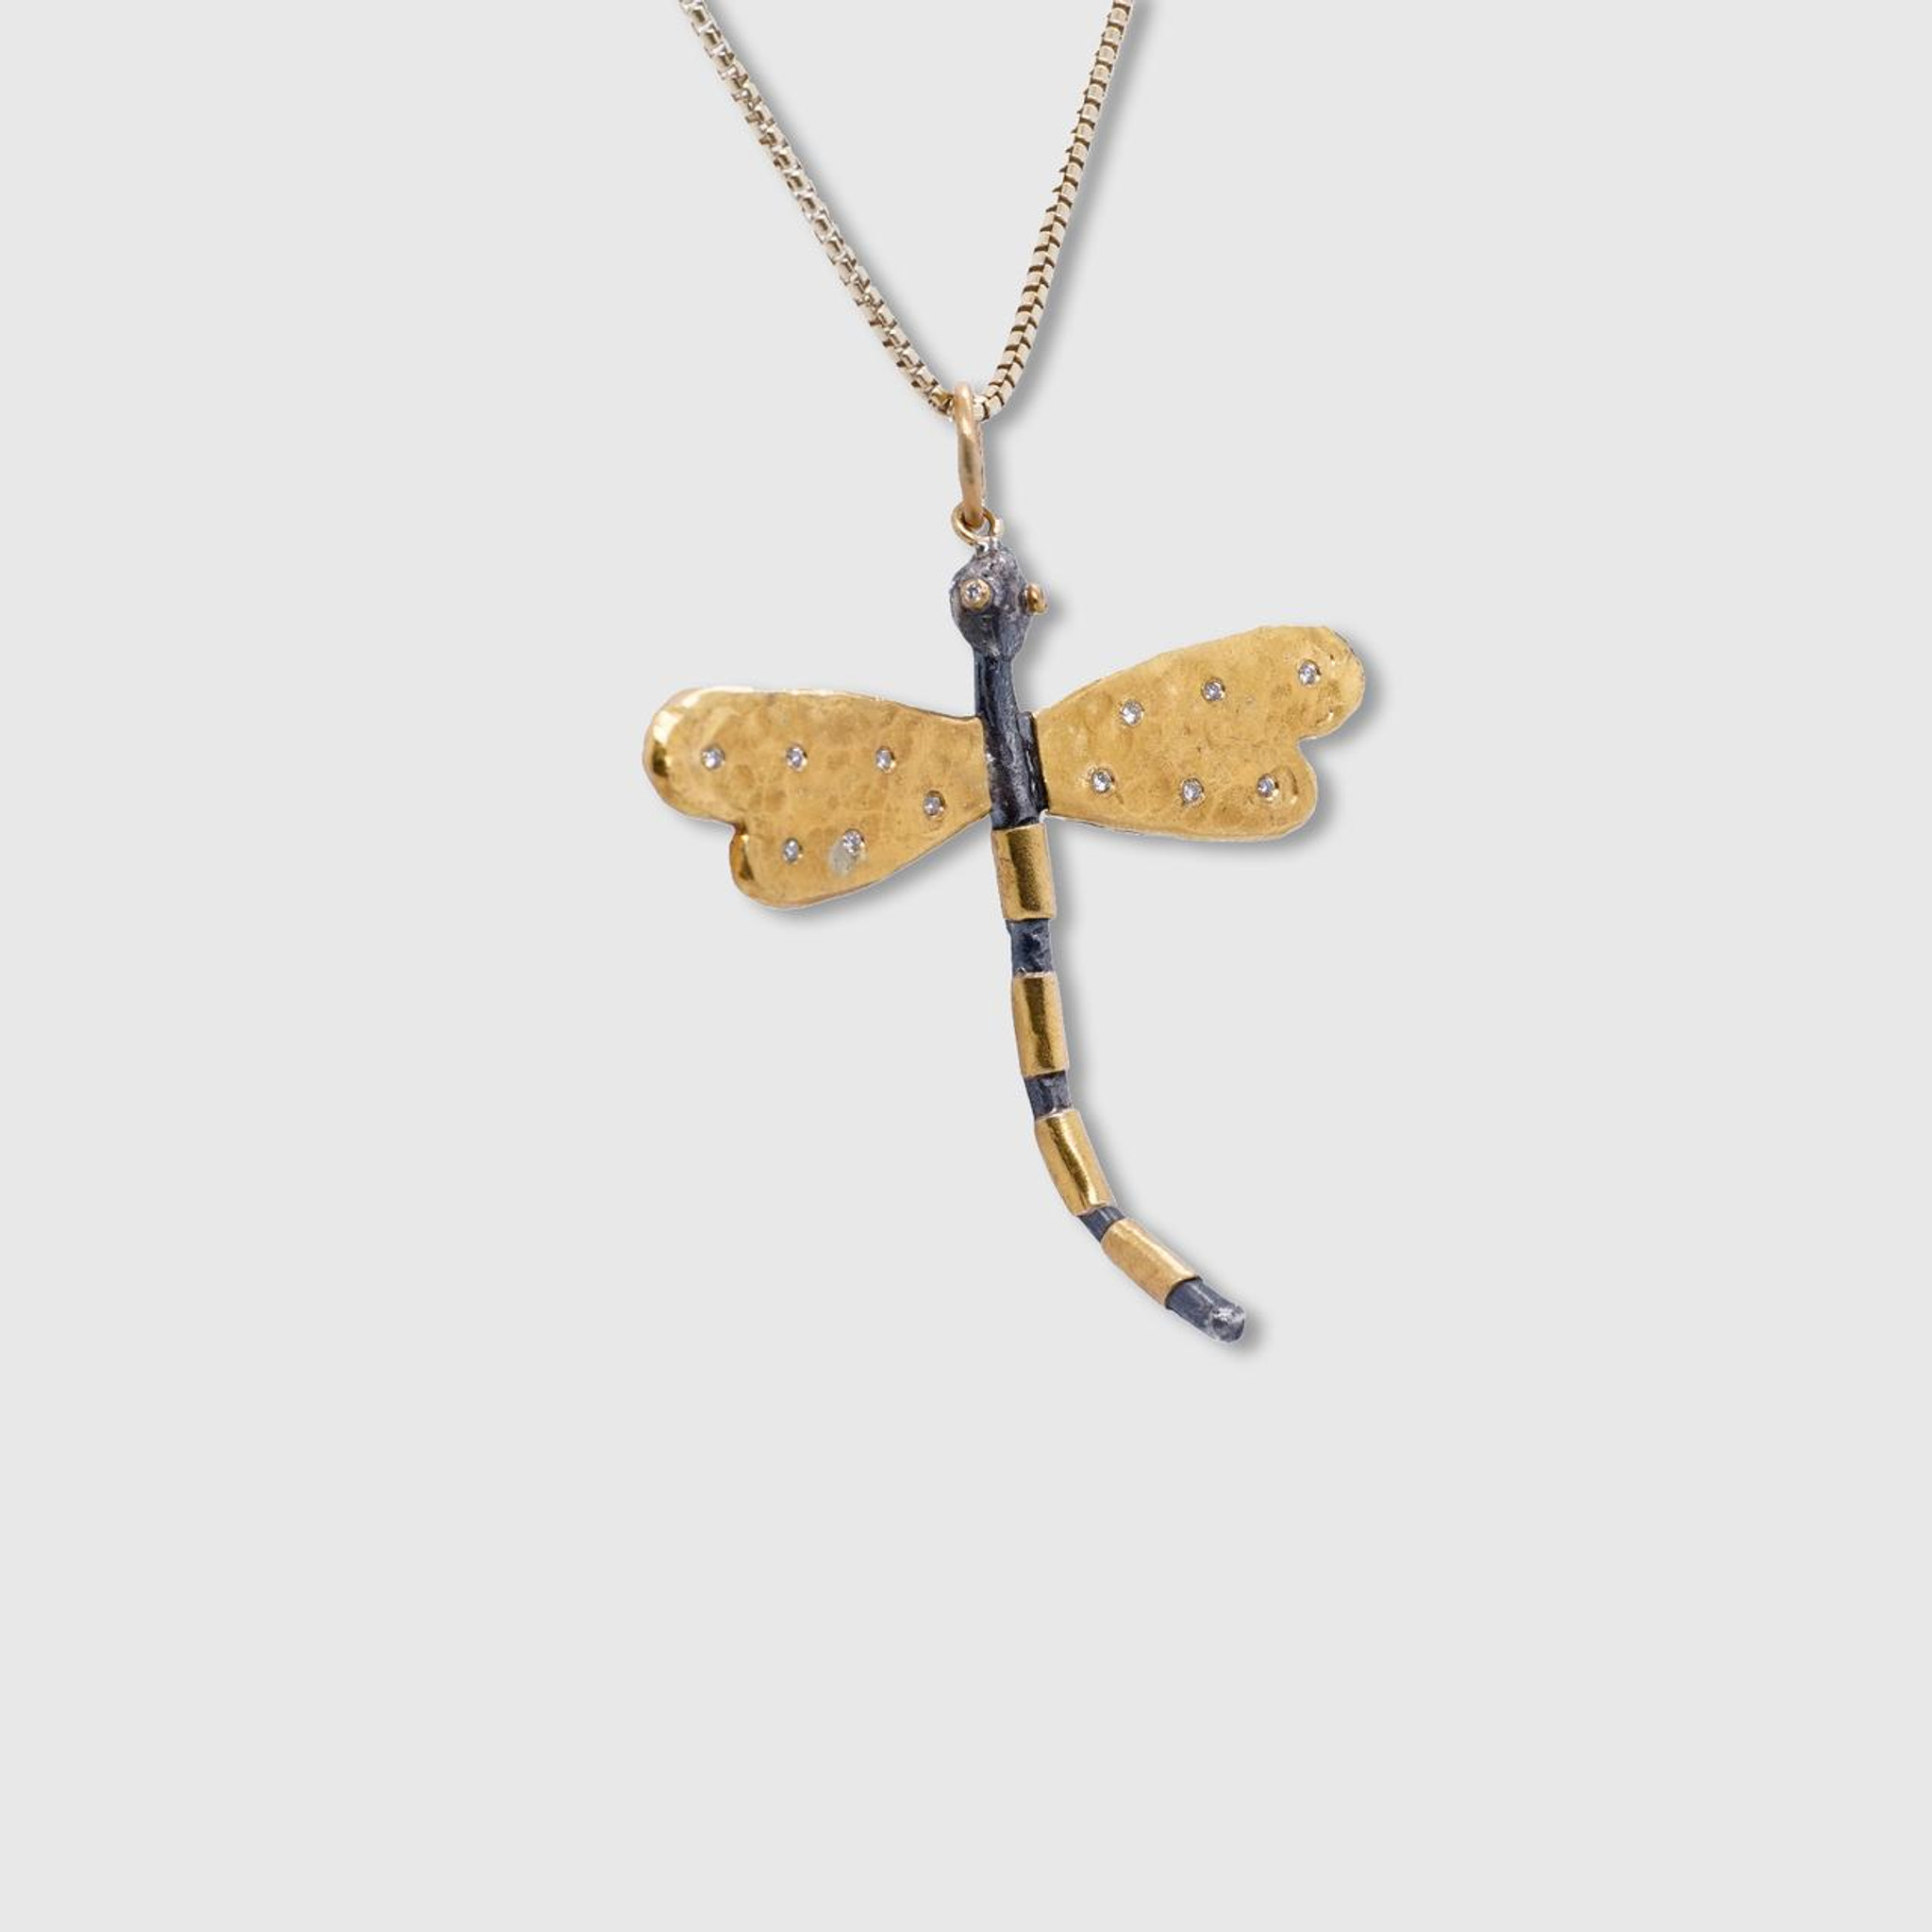 Prehistoric Works Large, Dragonfly Charm Pendant Necklace with Diamonds, 24kt Gold and Silver 